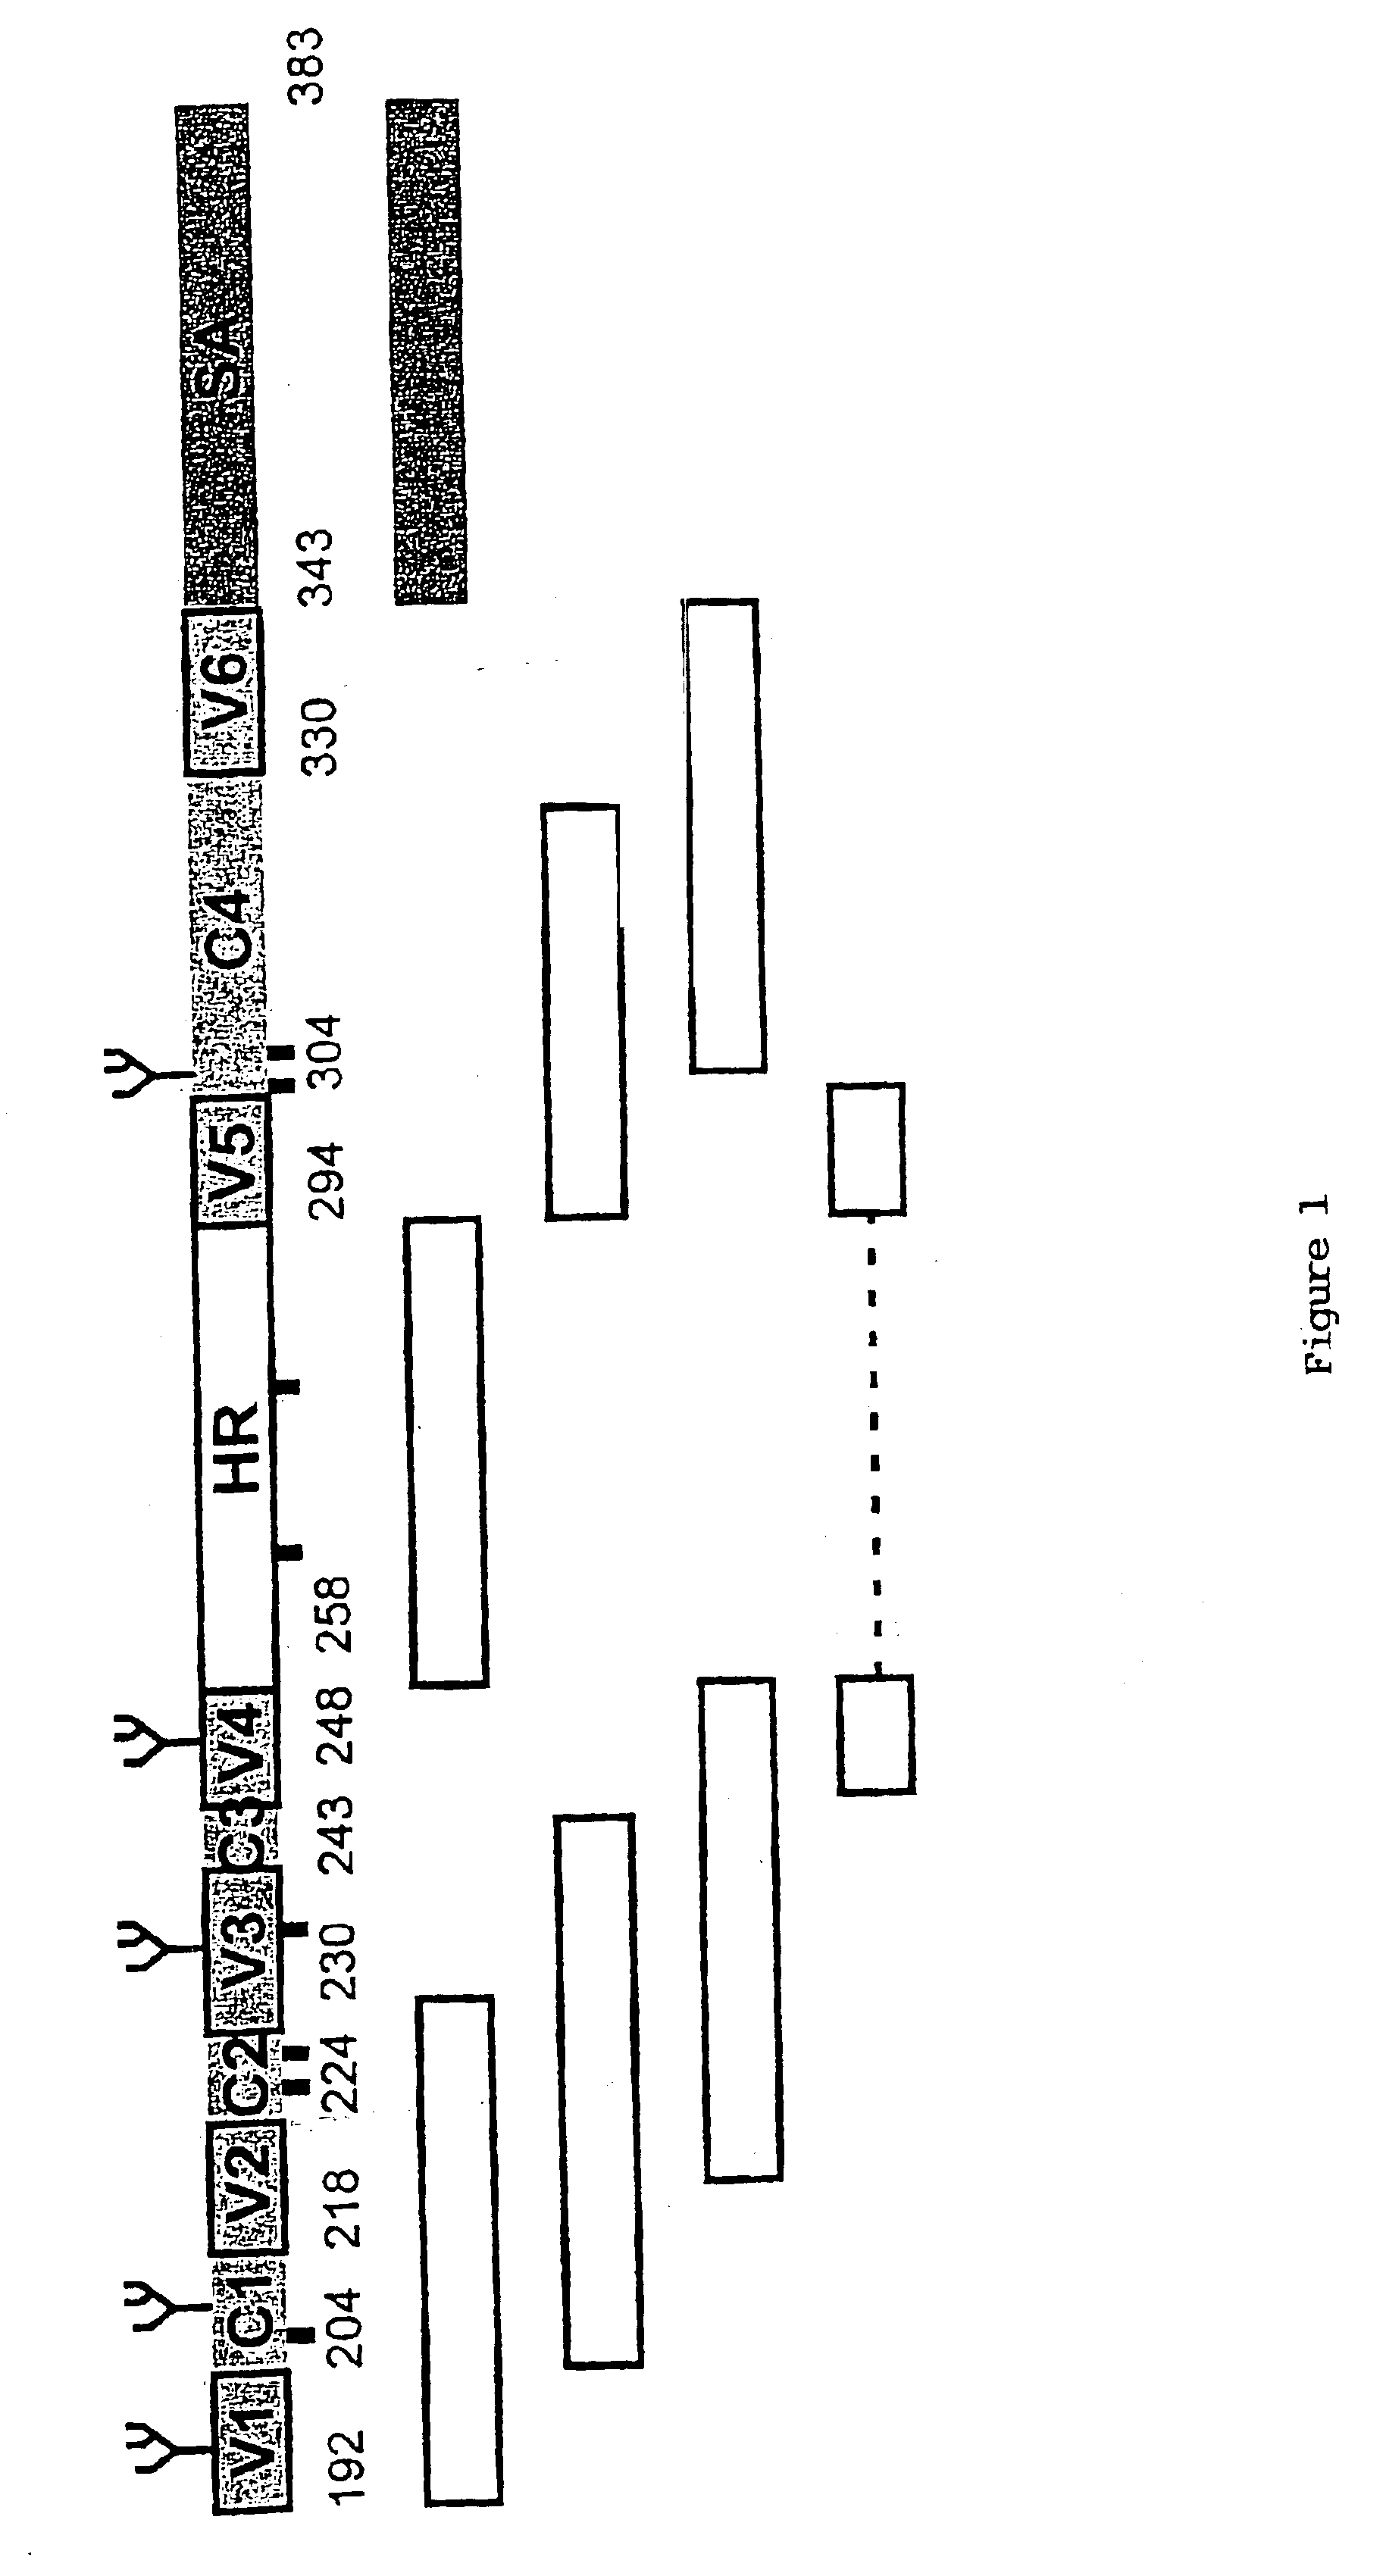 Multi-mer peptides derived from hepatitis C virus envelope proteins for diagnostic use and vaccination purposes